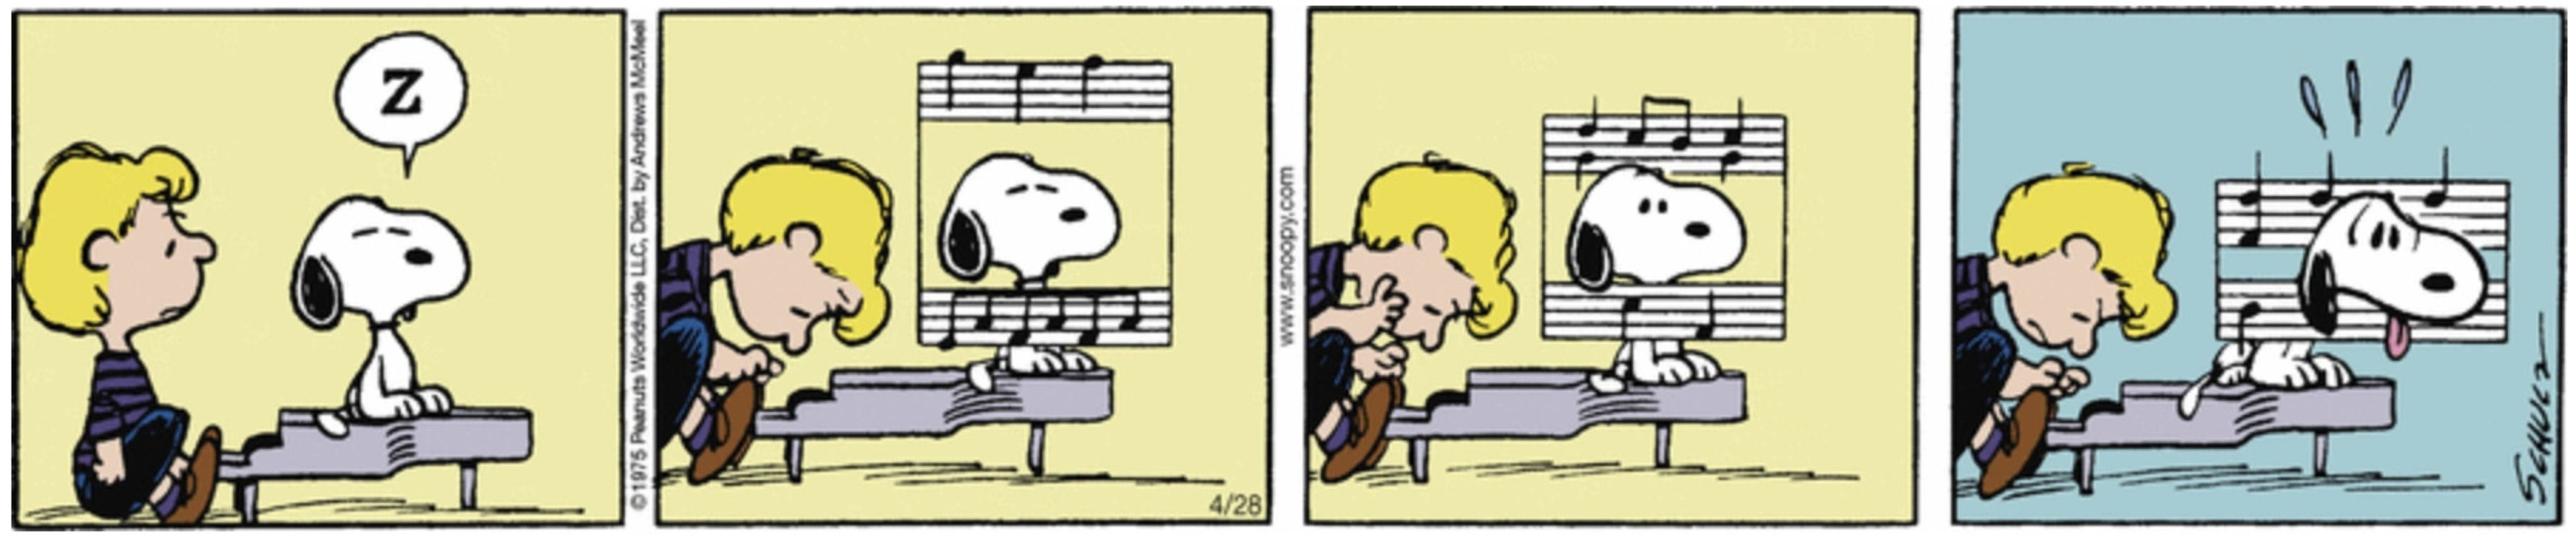 Peanuts, Snoopy gets his head stuck in the musical notes that Schroeder is playing on his piano.